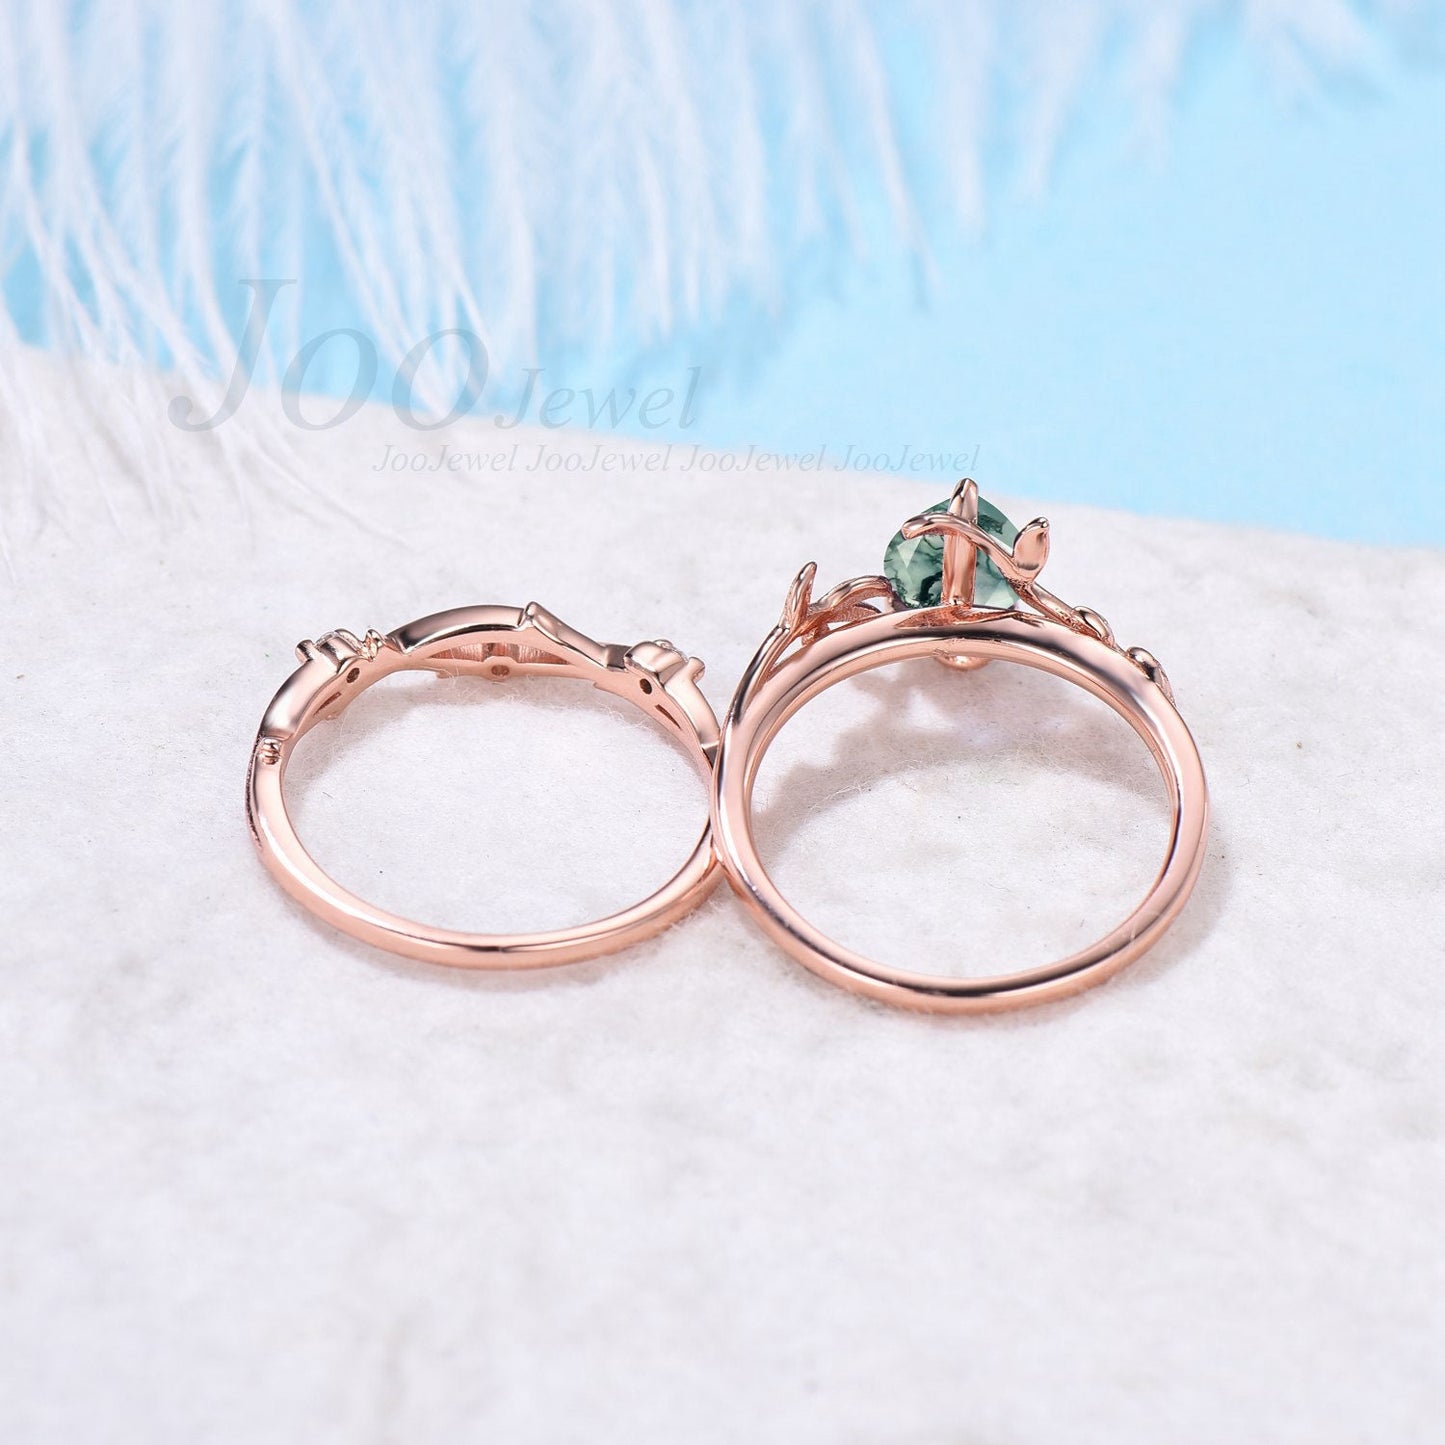 Pear Shaped Natural Moss Agate Ring Leaf Engagement Ring Set Green Gemstone Jewelry Twig Wedding Band Emerald Moss Bridal Set Unique Gifts